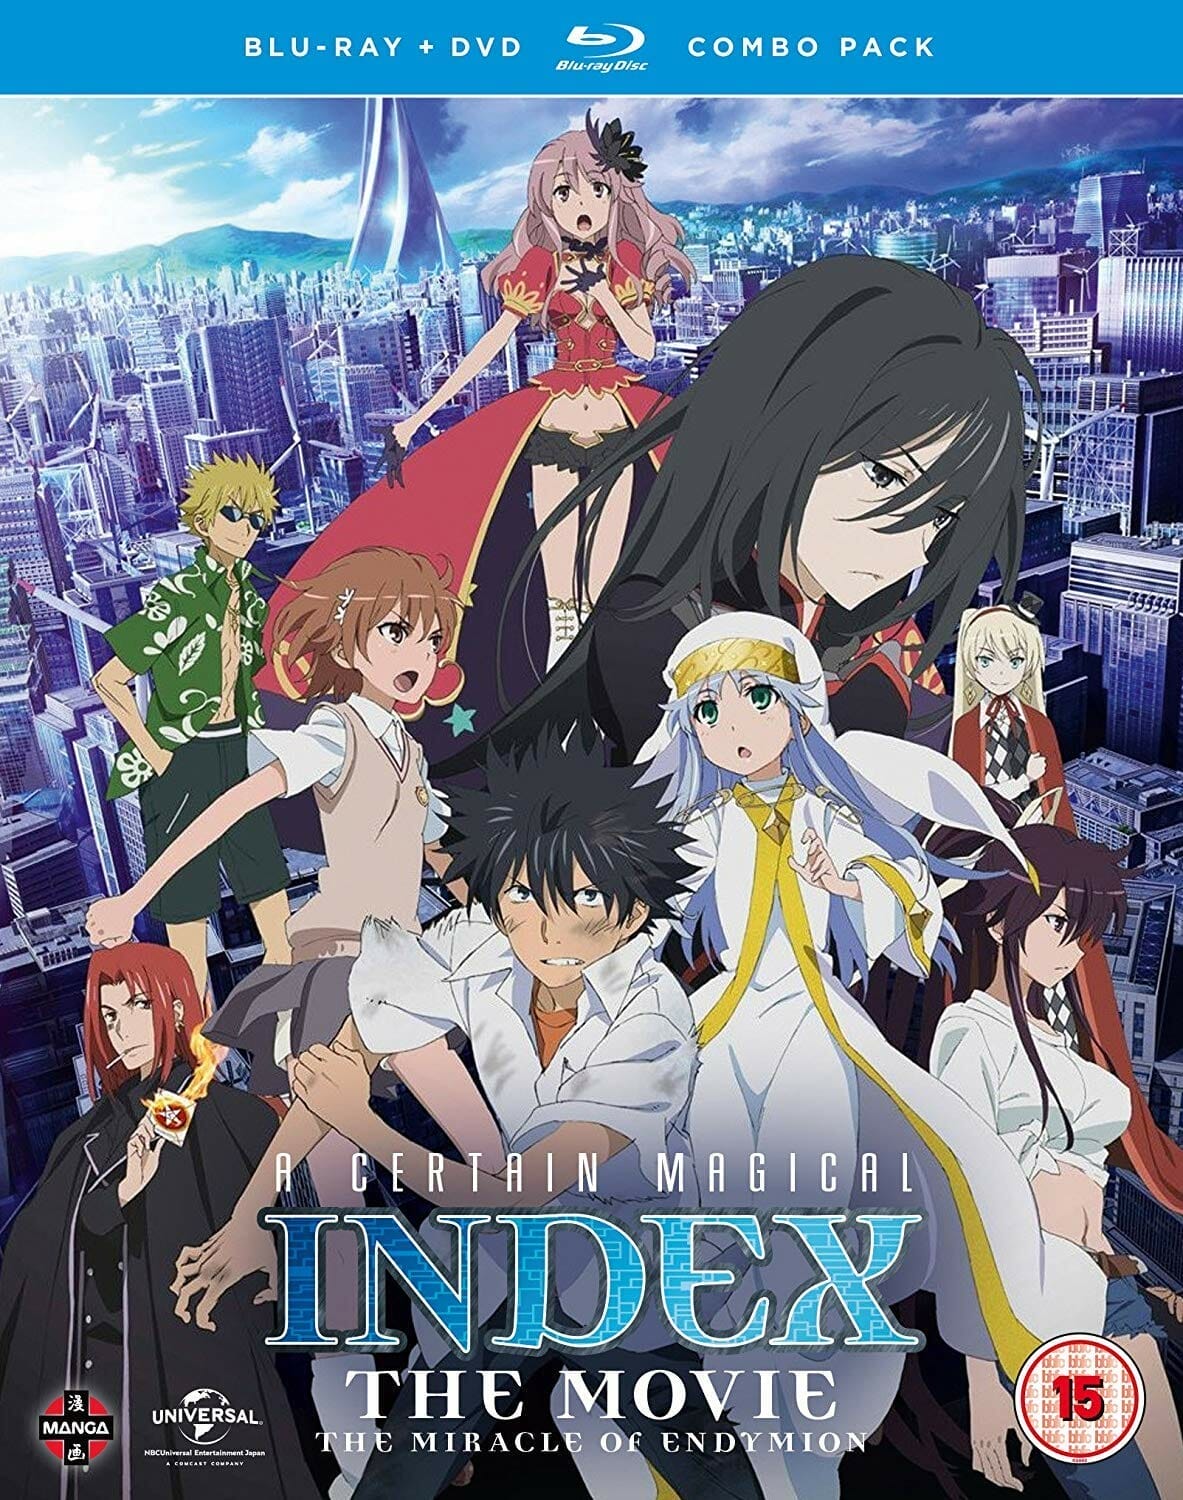 A Certain Magical Index movie cover